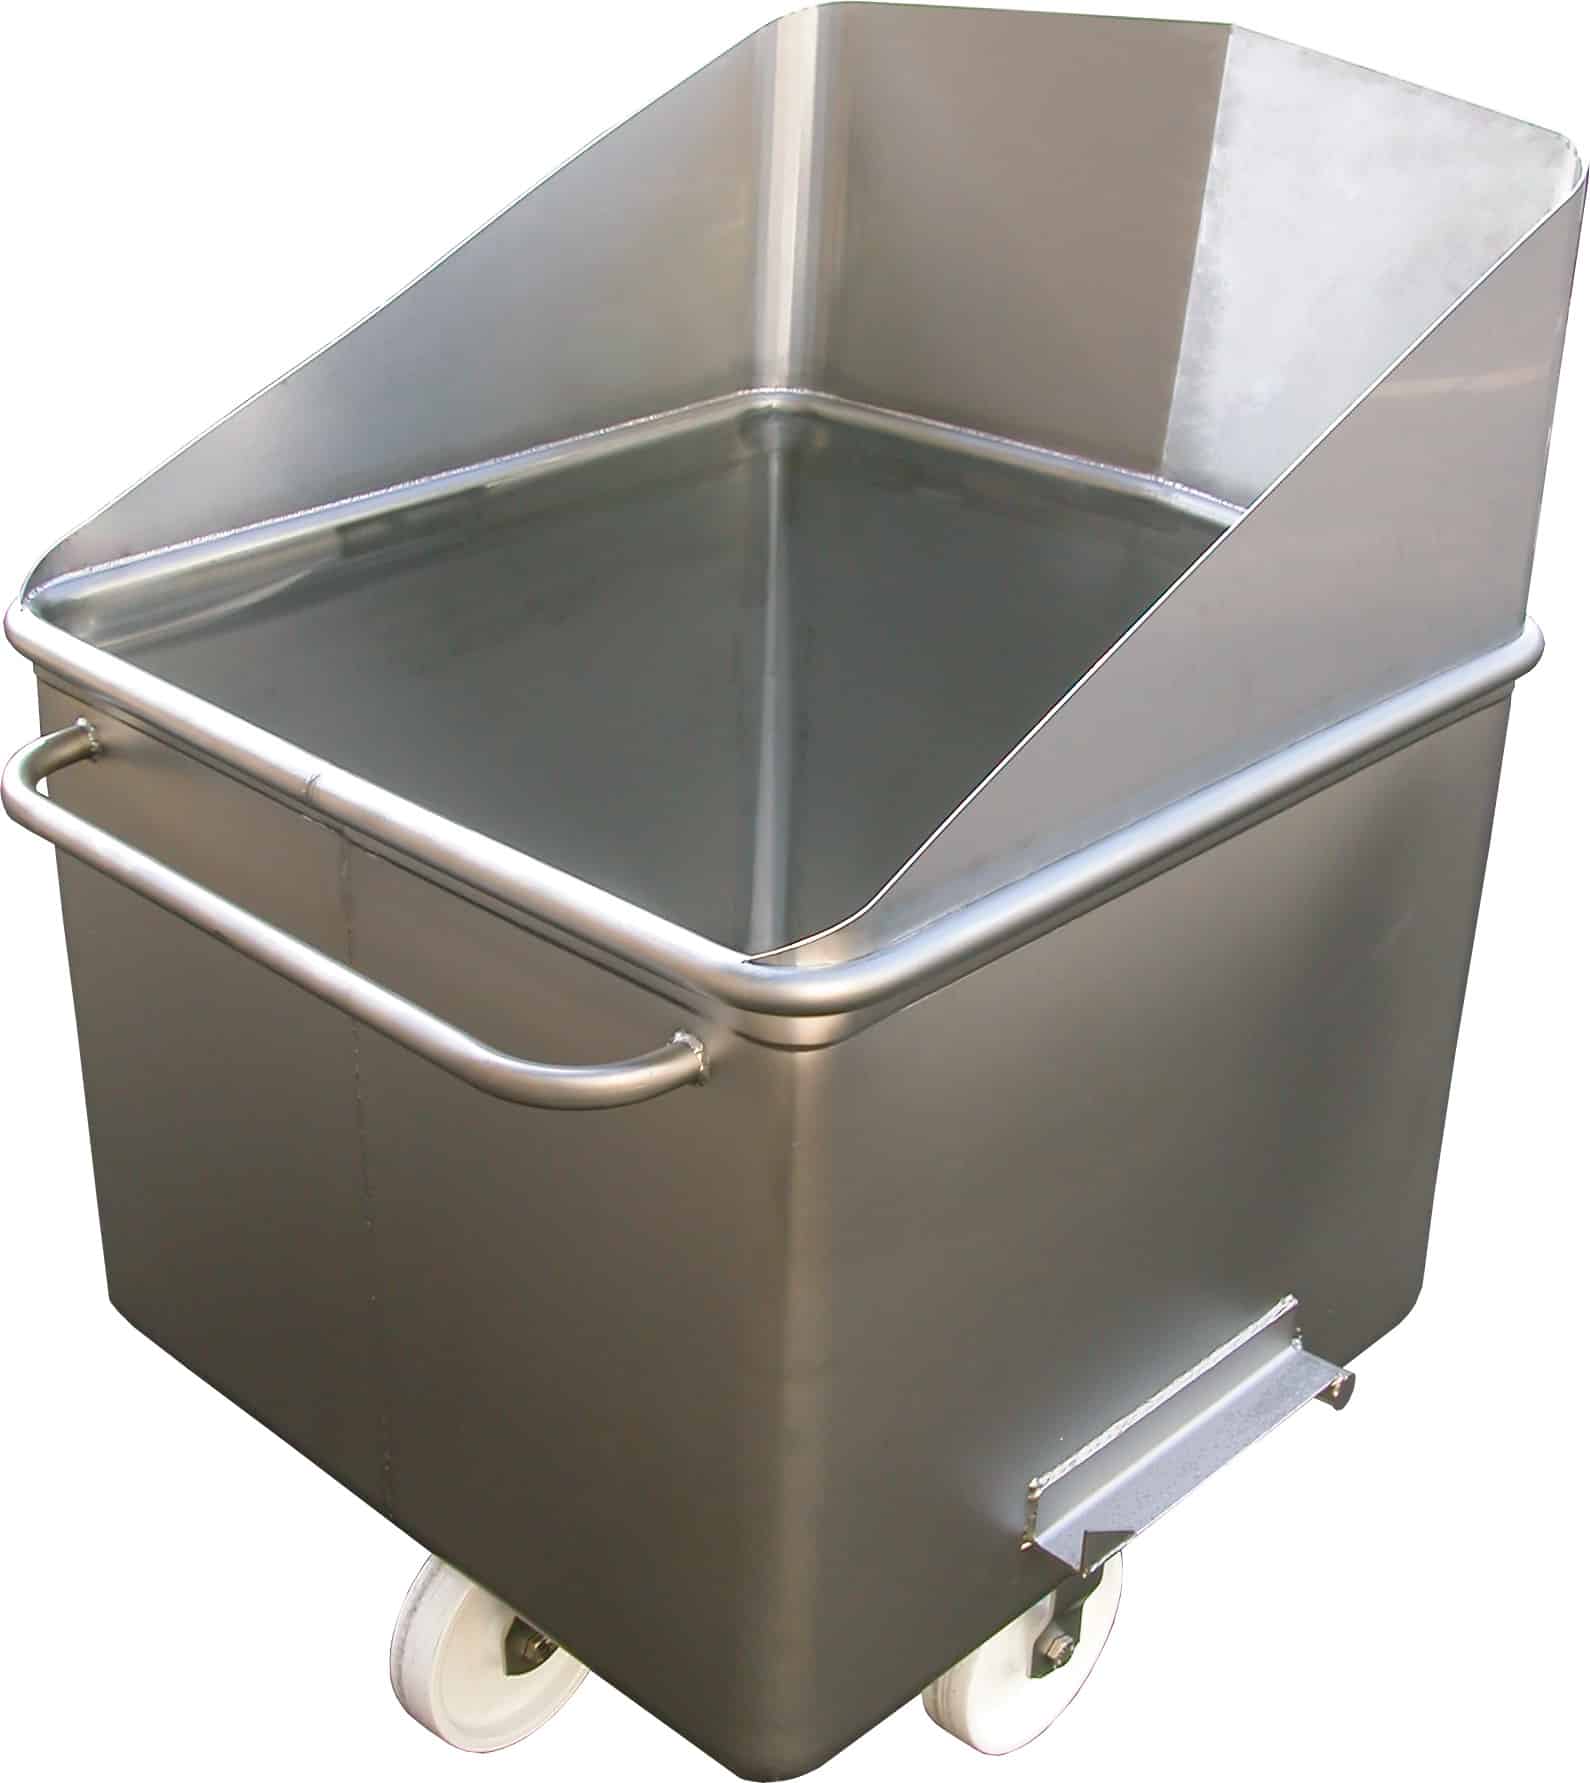 Stainless steel chuted tote bin